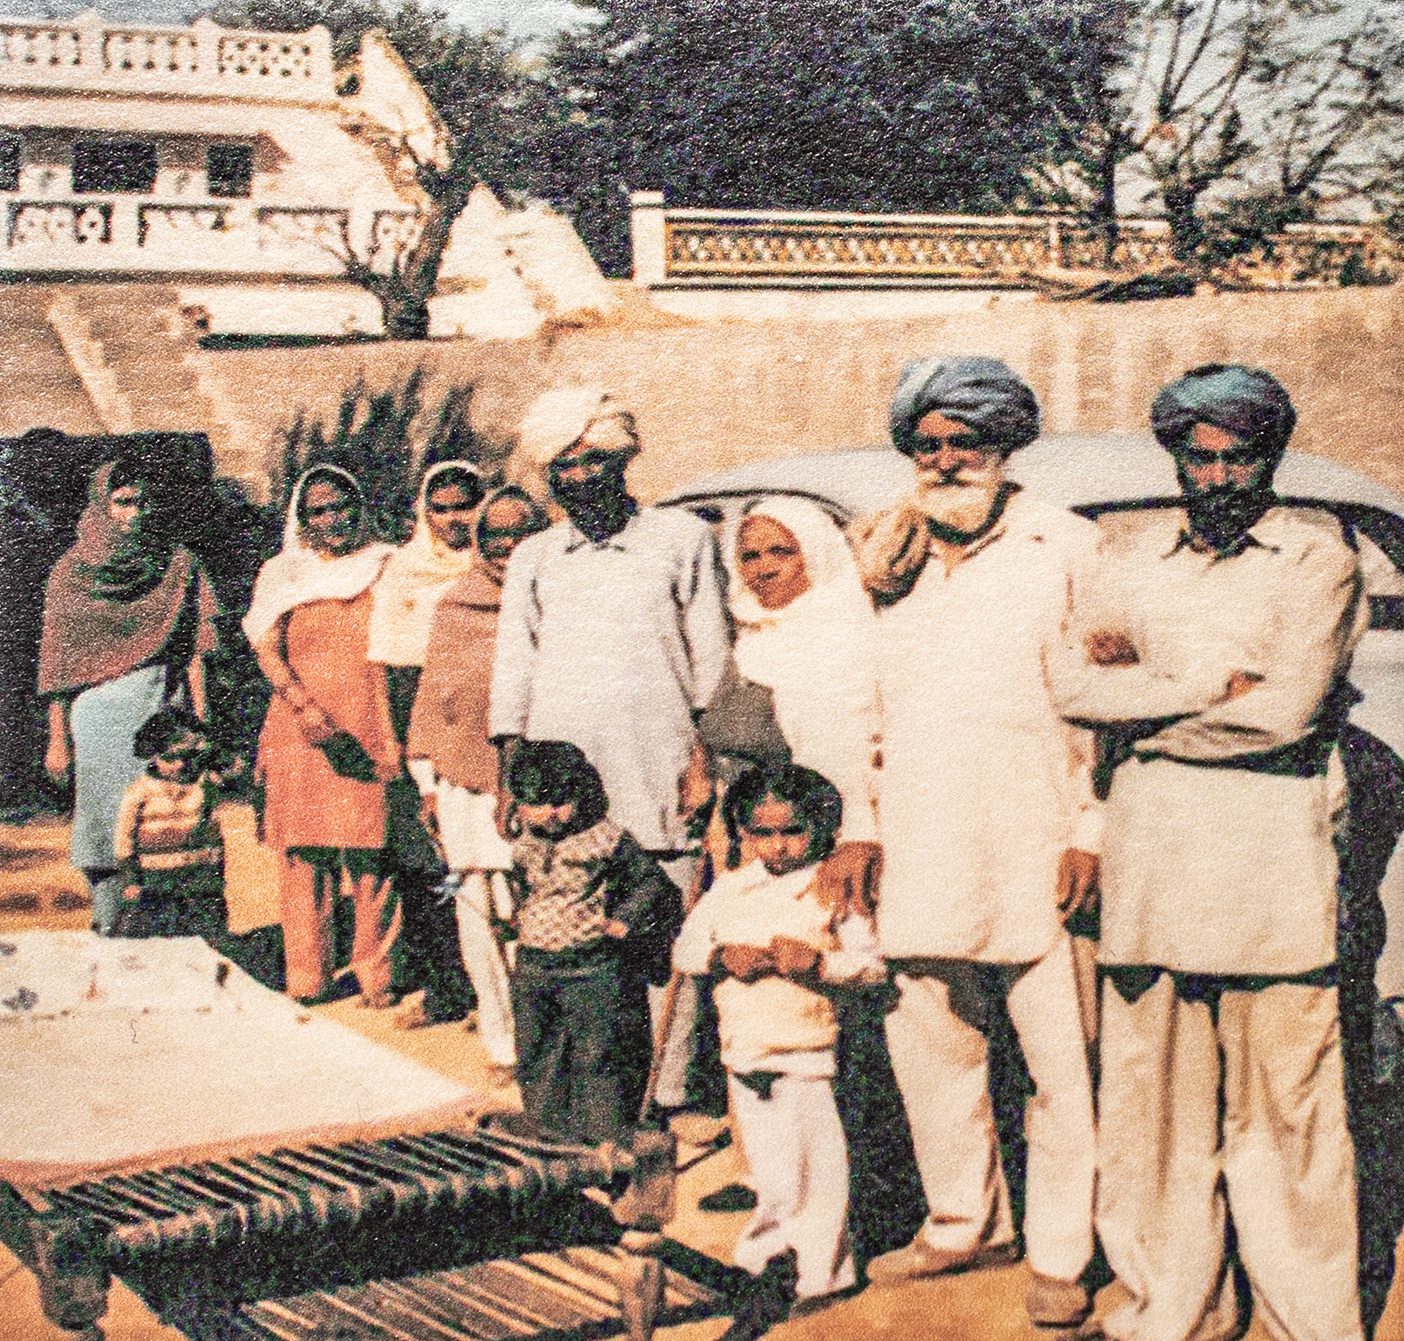 An indian family in traditional Indian garb stands in front of their ancestral home and an old-fashioned car. There is a weaving loom on the ground in front of them.